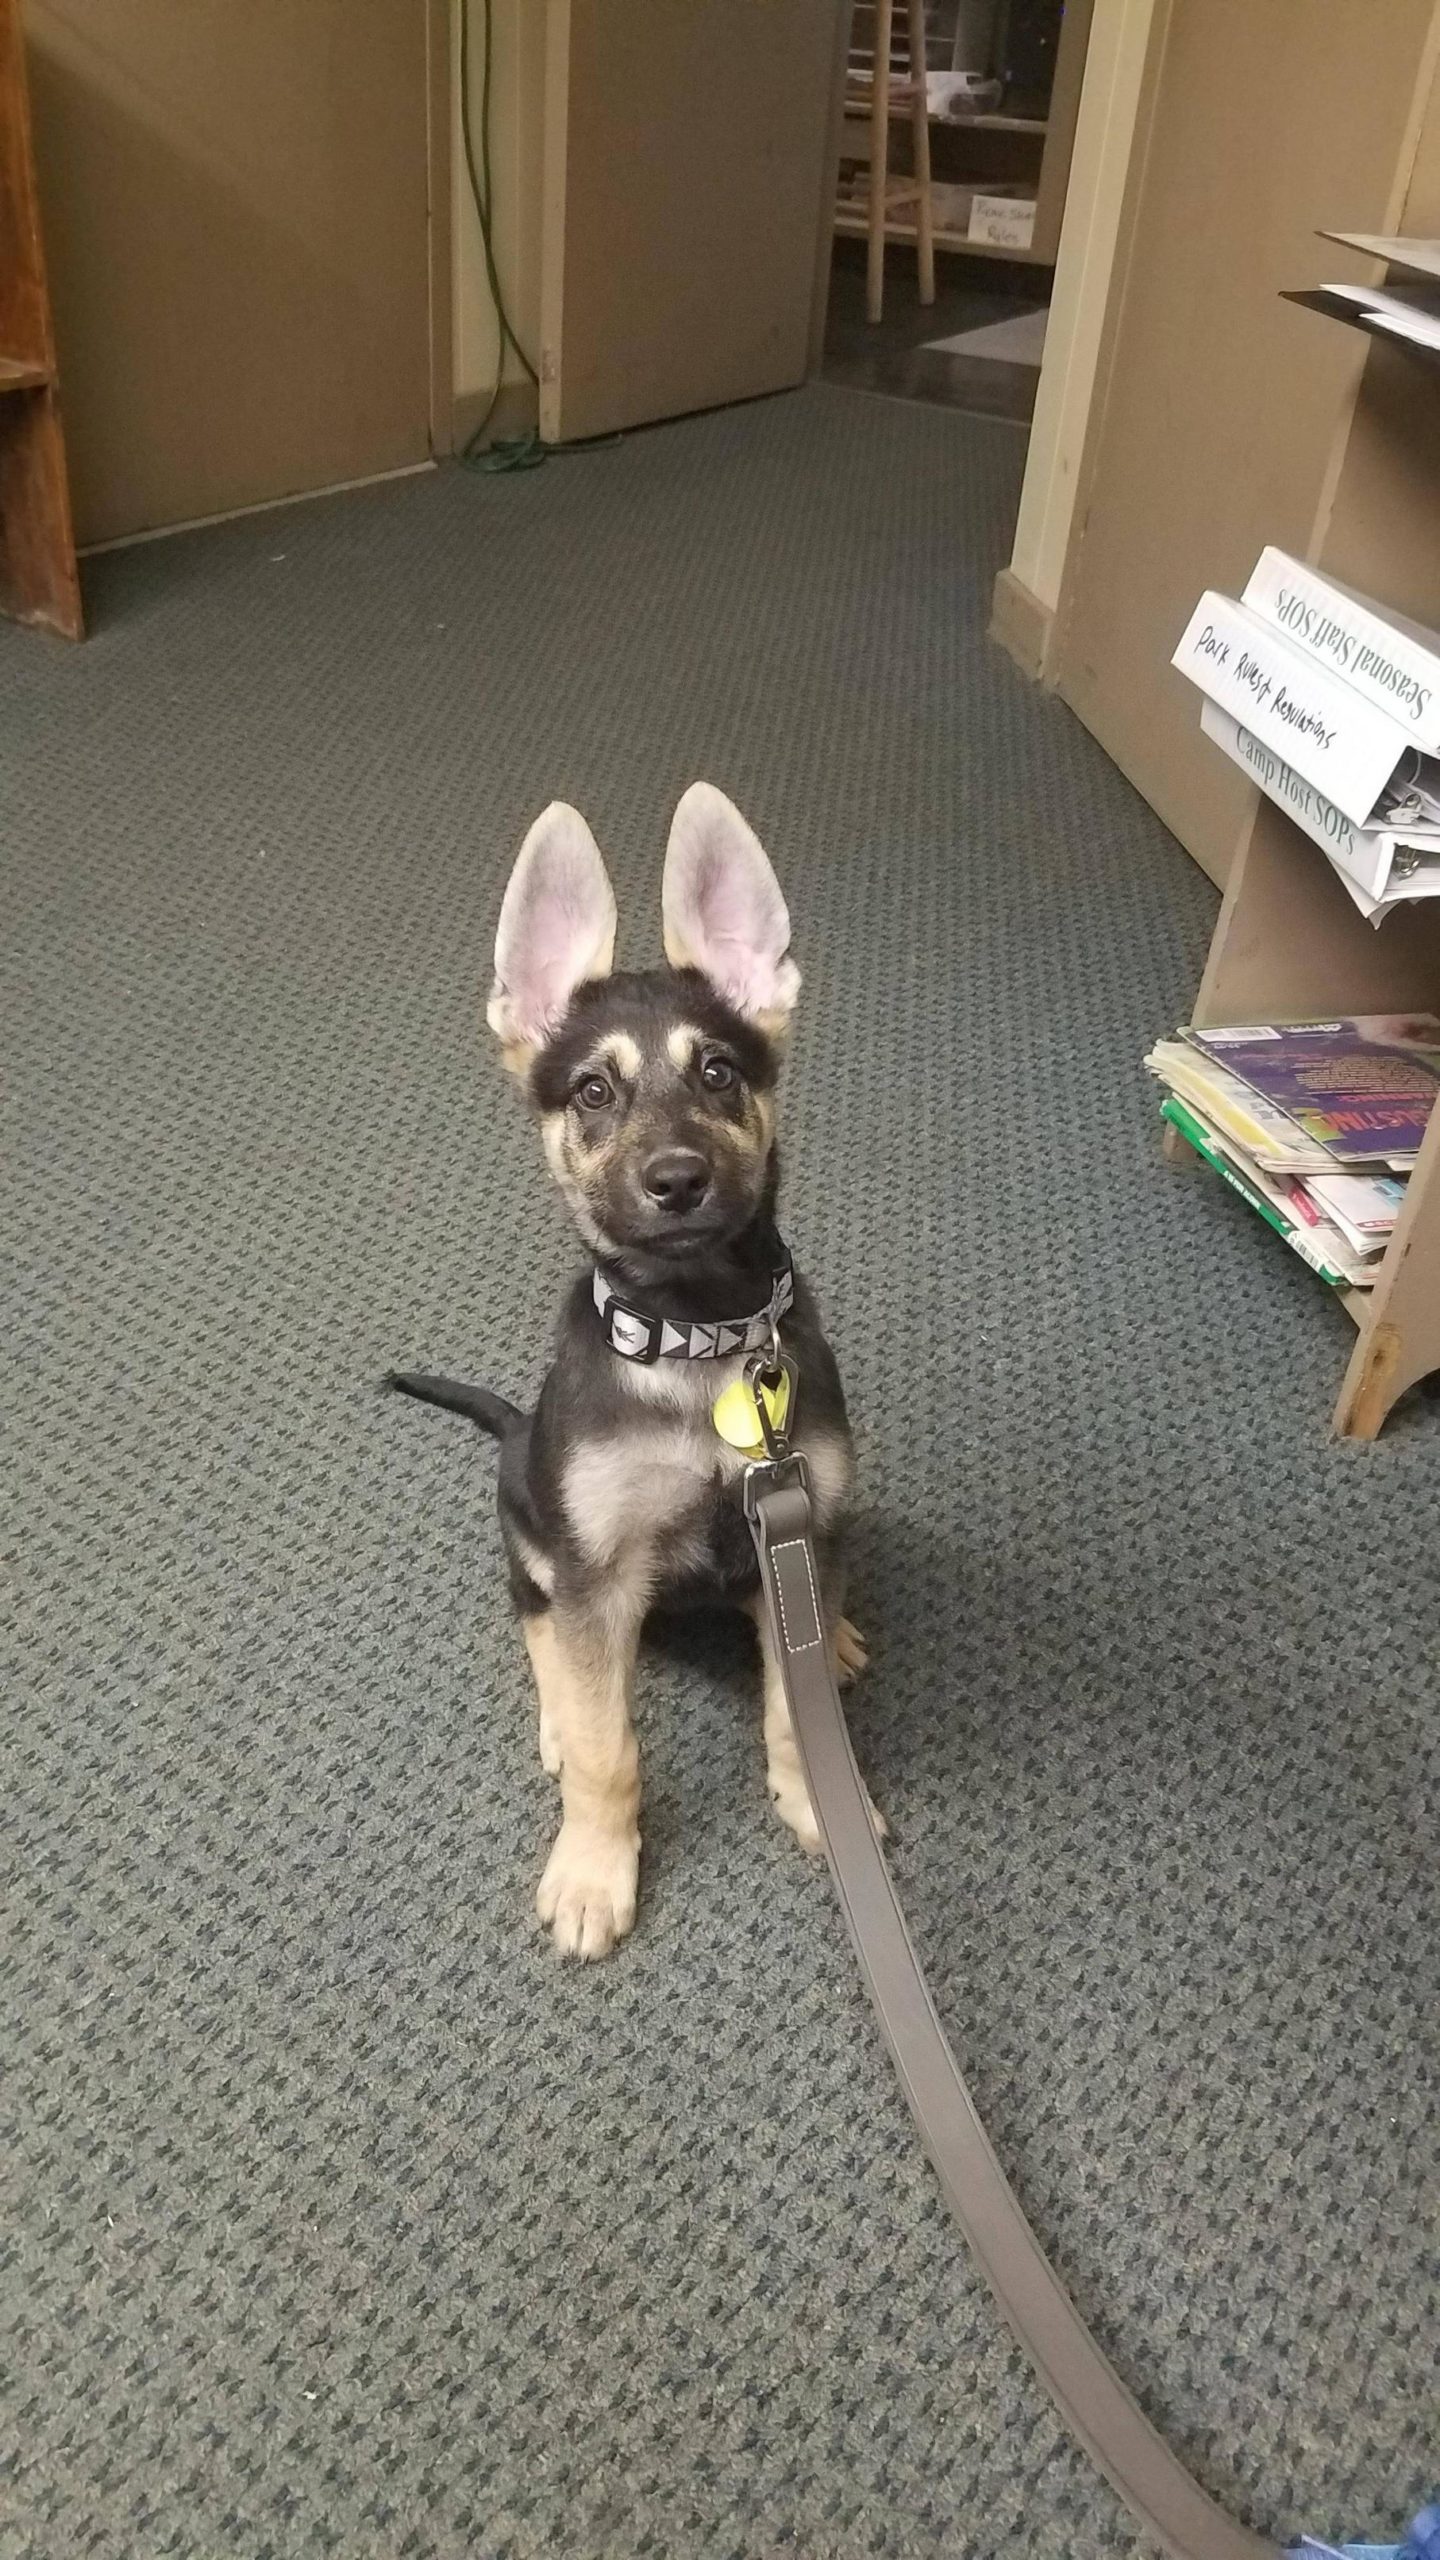 puppy with large ears and feet